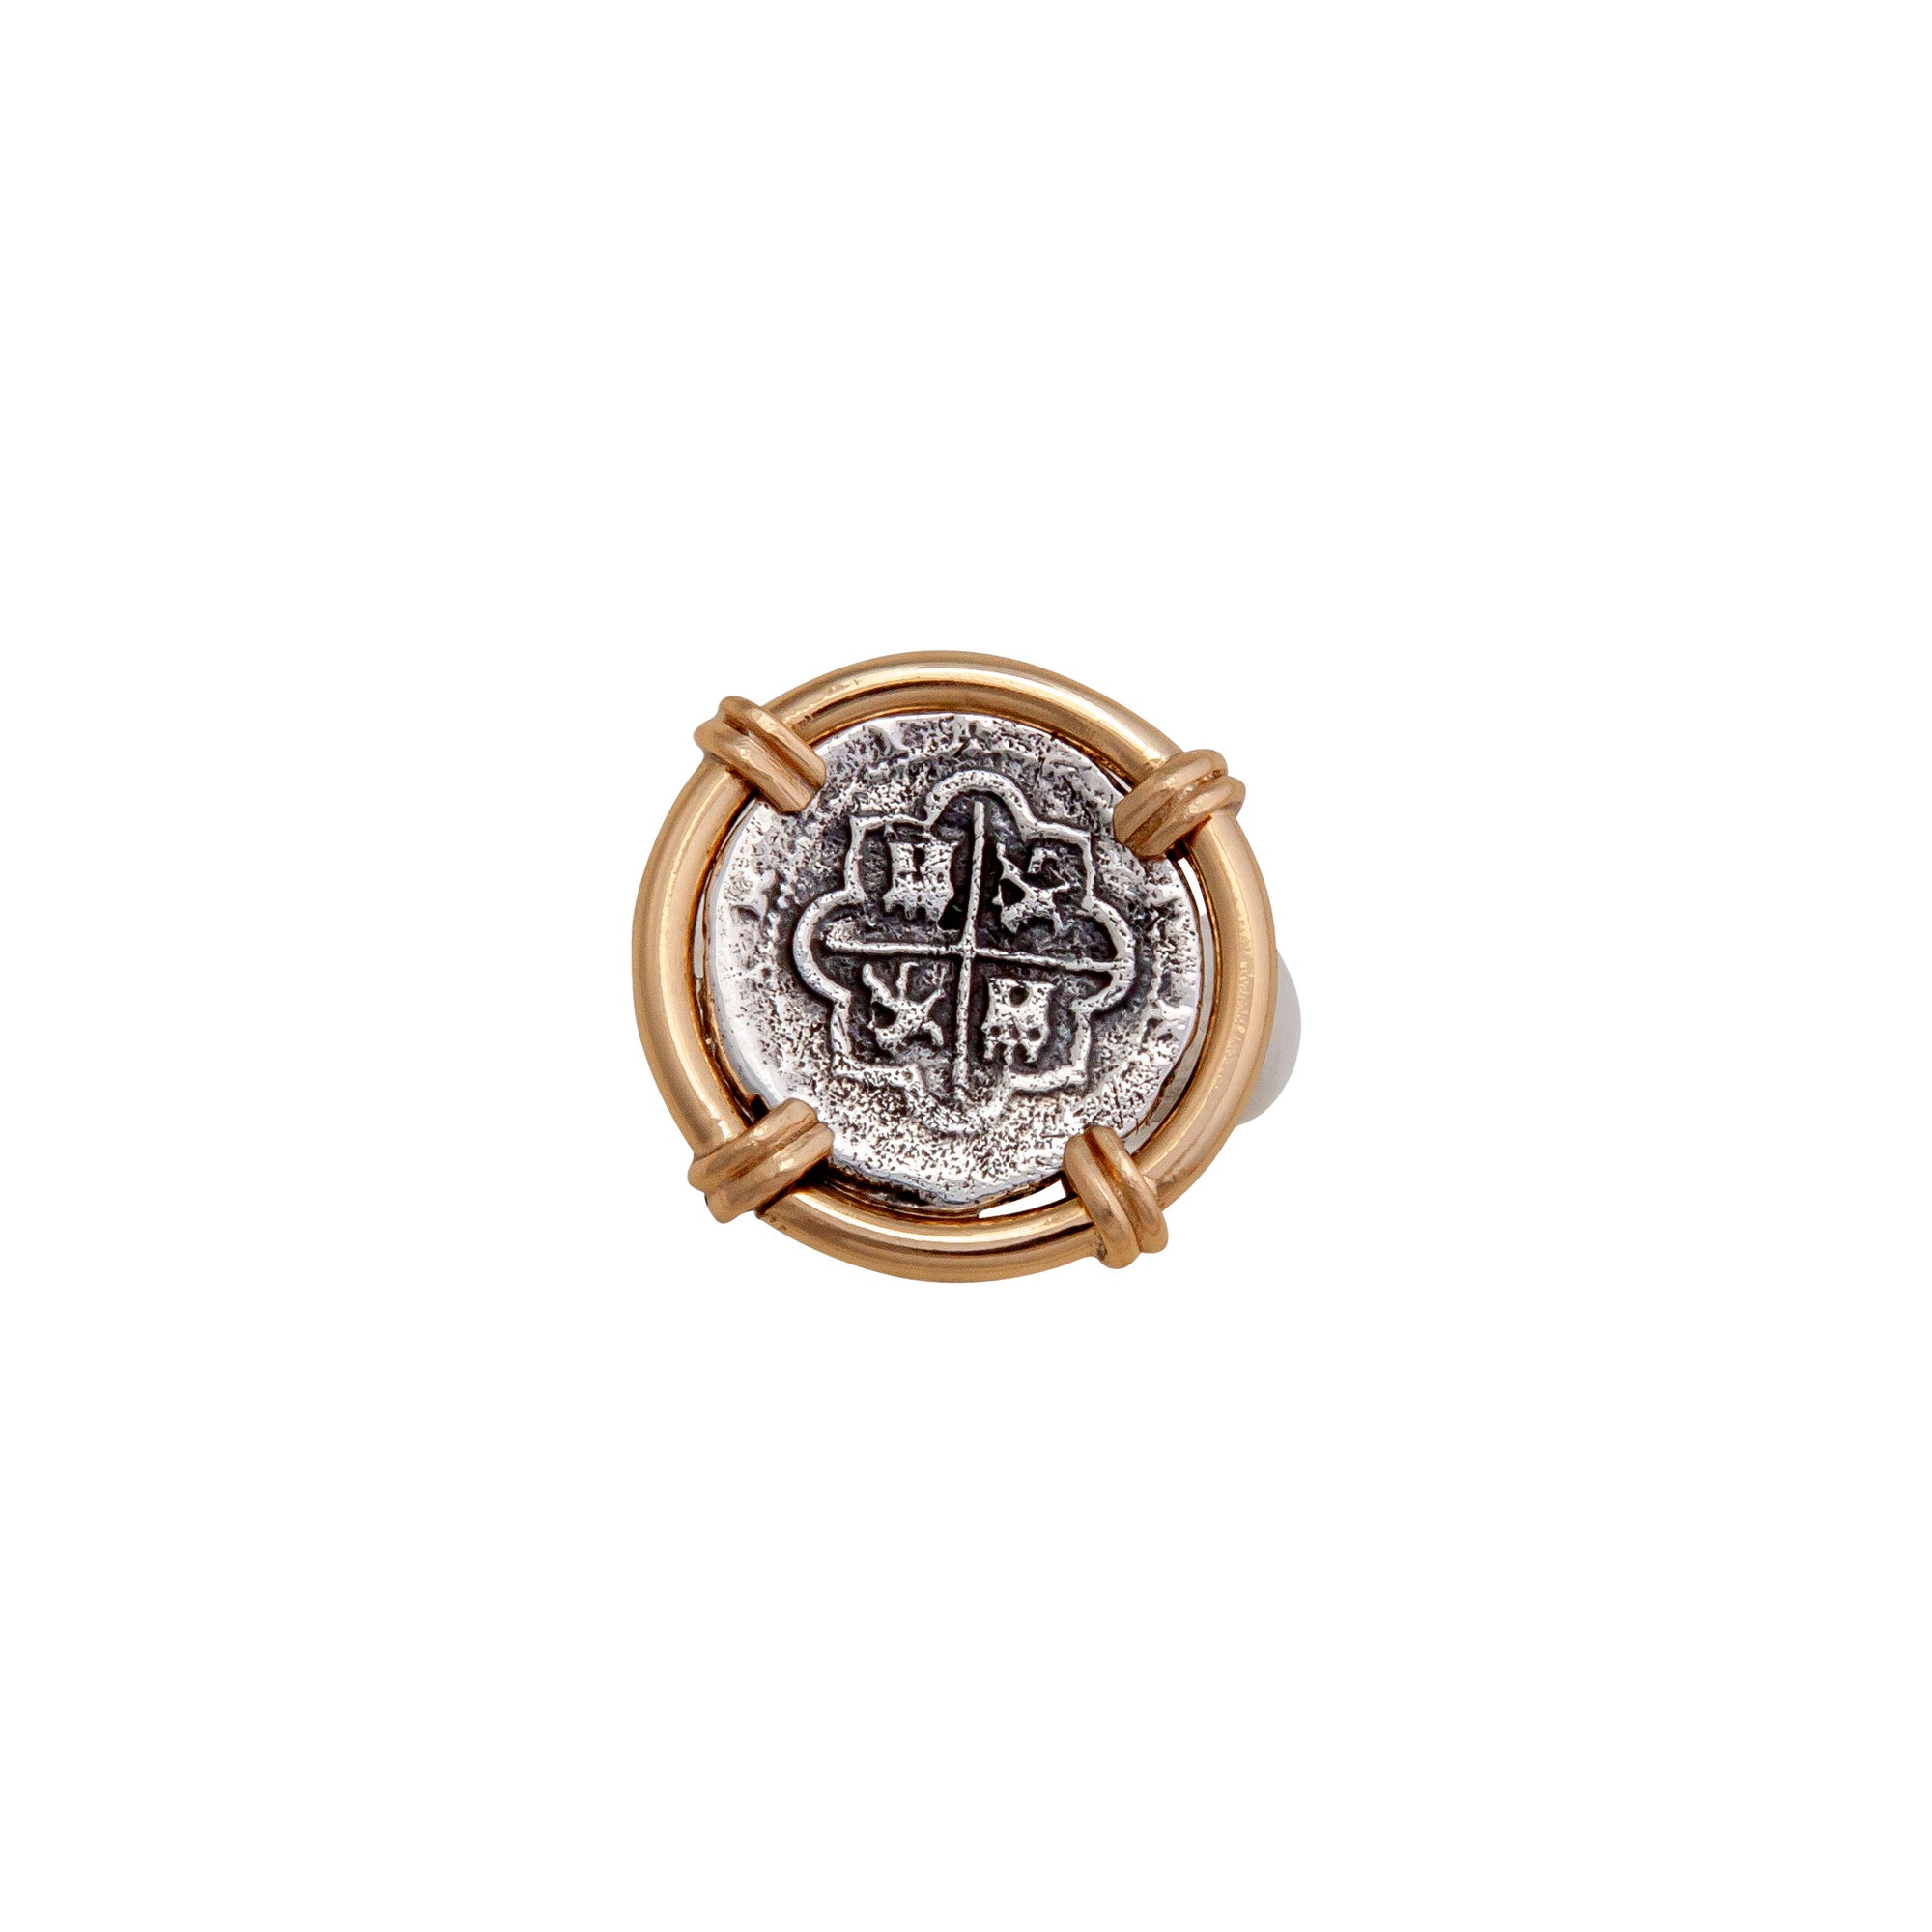 Sterling Silver and Alchemia Spanish Coin Prong Set Adjustable Ring | Charles Albert Jewelry